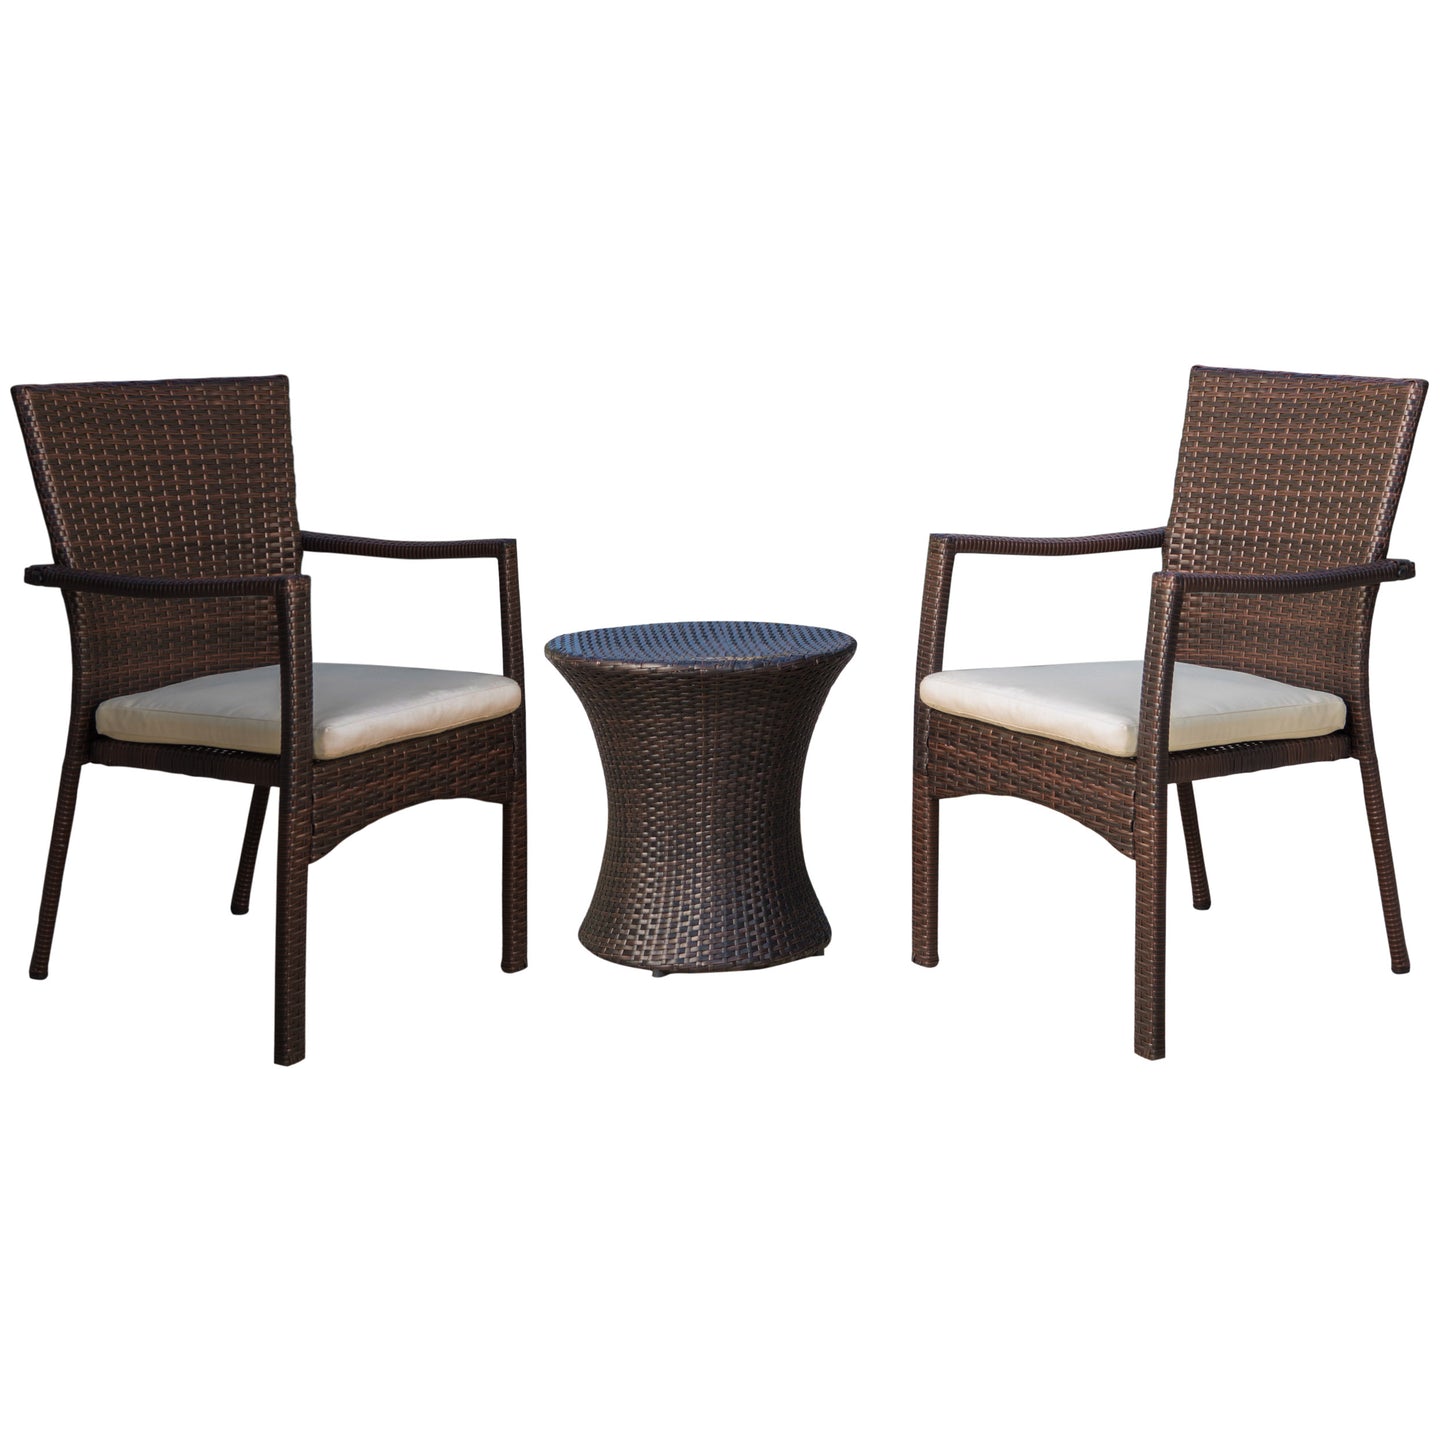 Vestavia Outdoors Brown Wicker 3 Piece Stacking Chair Chat Set